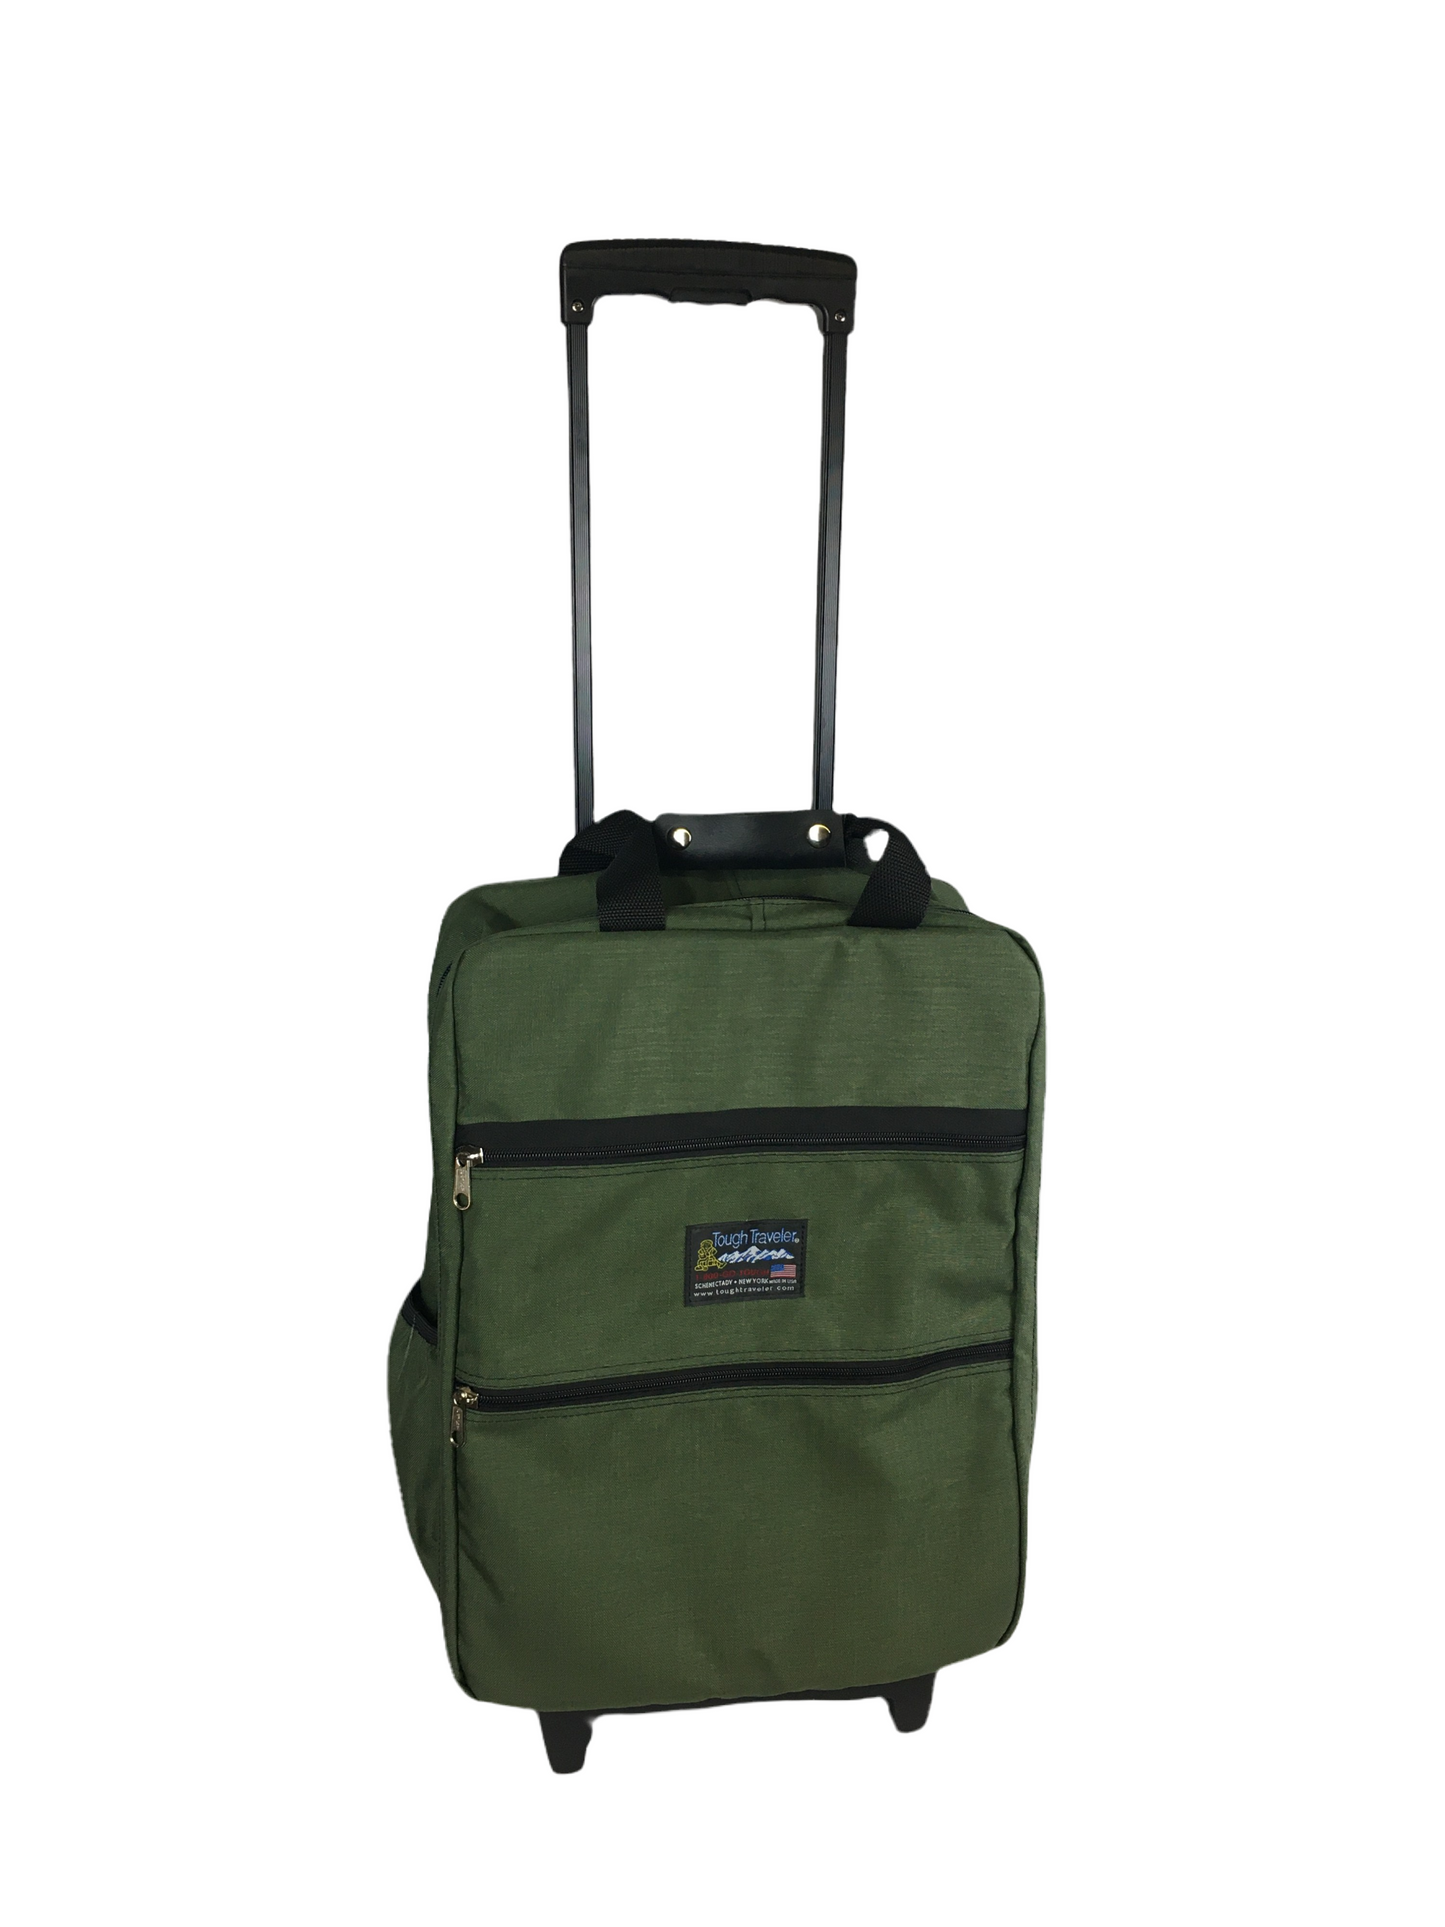 CLIPPER Wheeled Carry-On Carry-on Luggage, by Tough Traveler. Made in USA since 1970